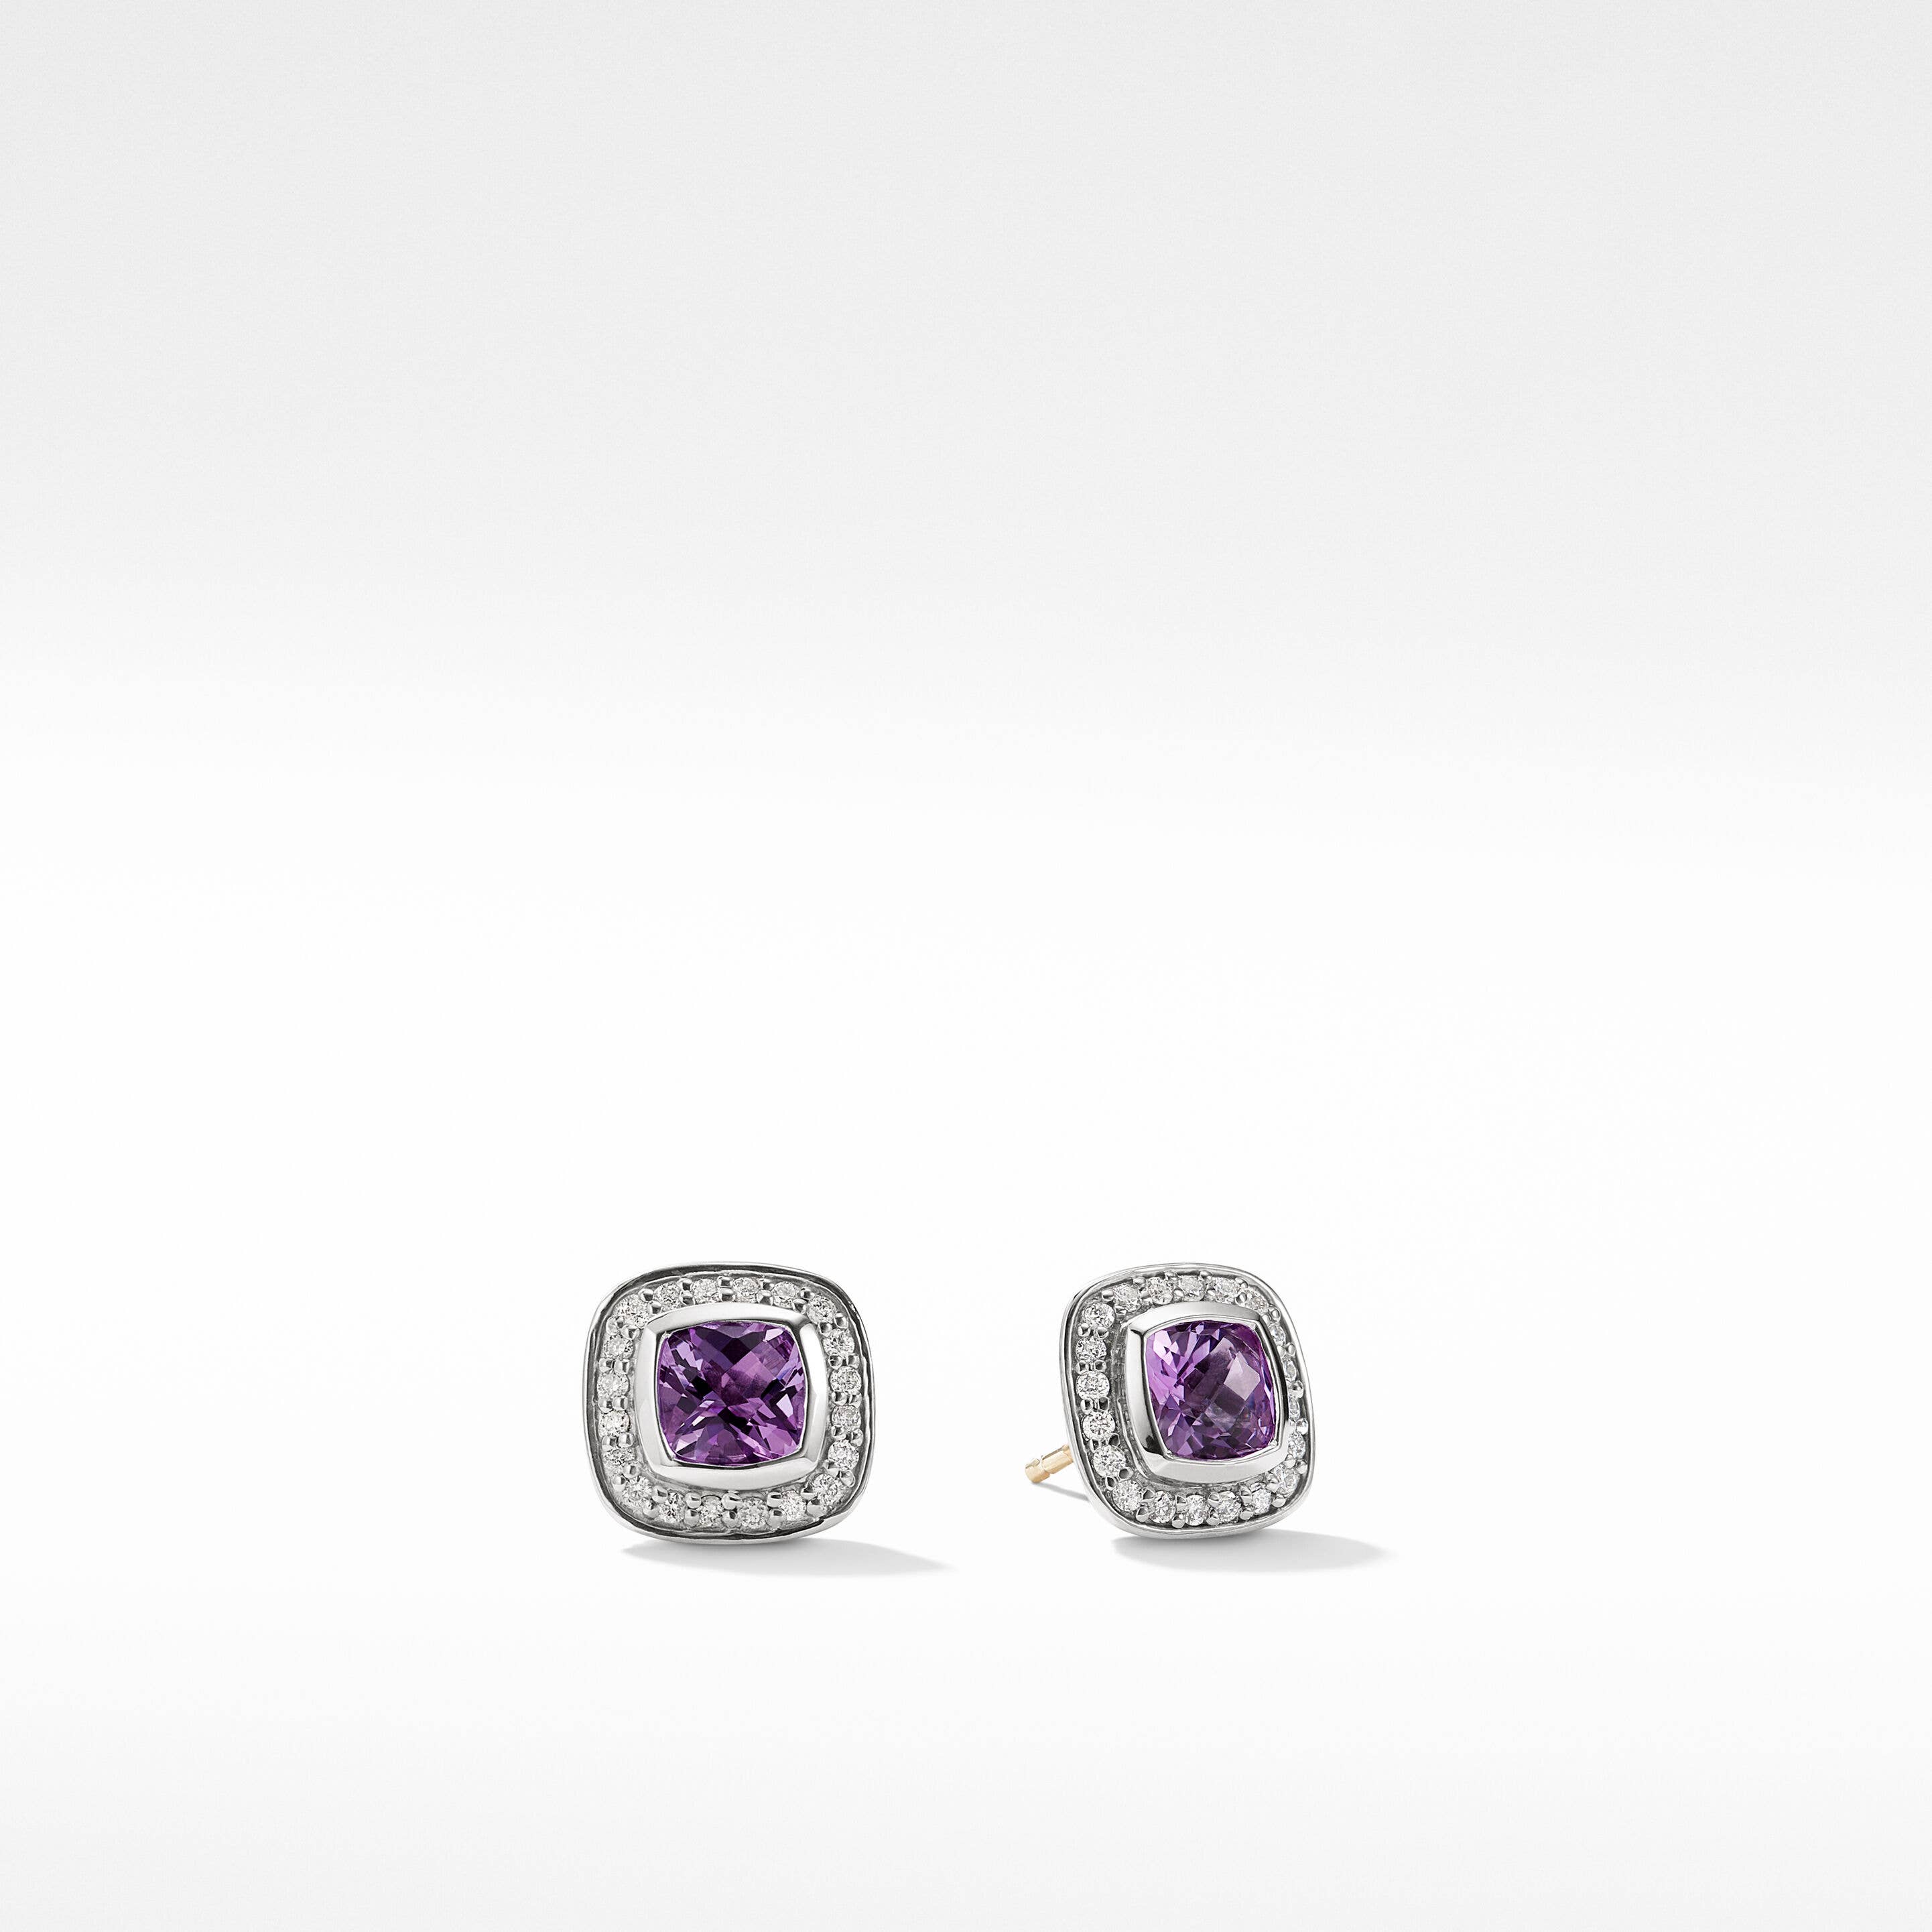 Petite Albion® Stud Earrings with Amethyst and Pavé Diamonds